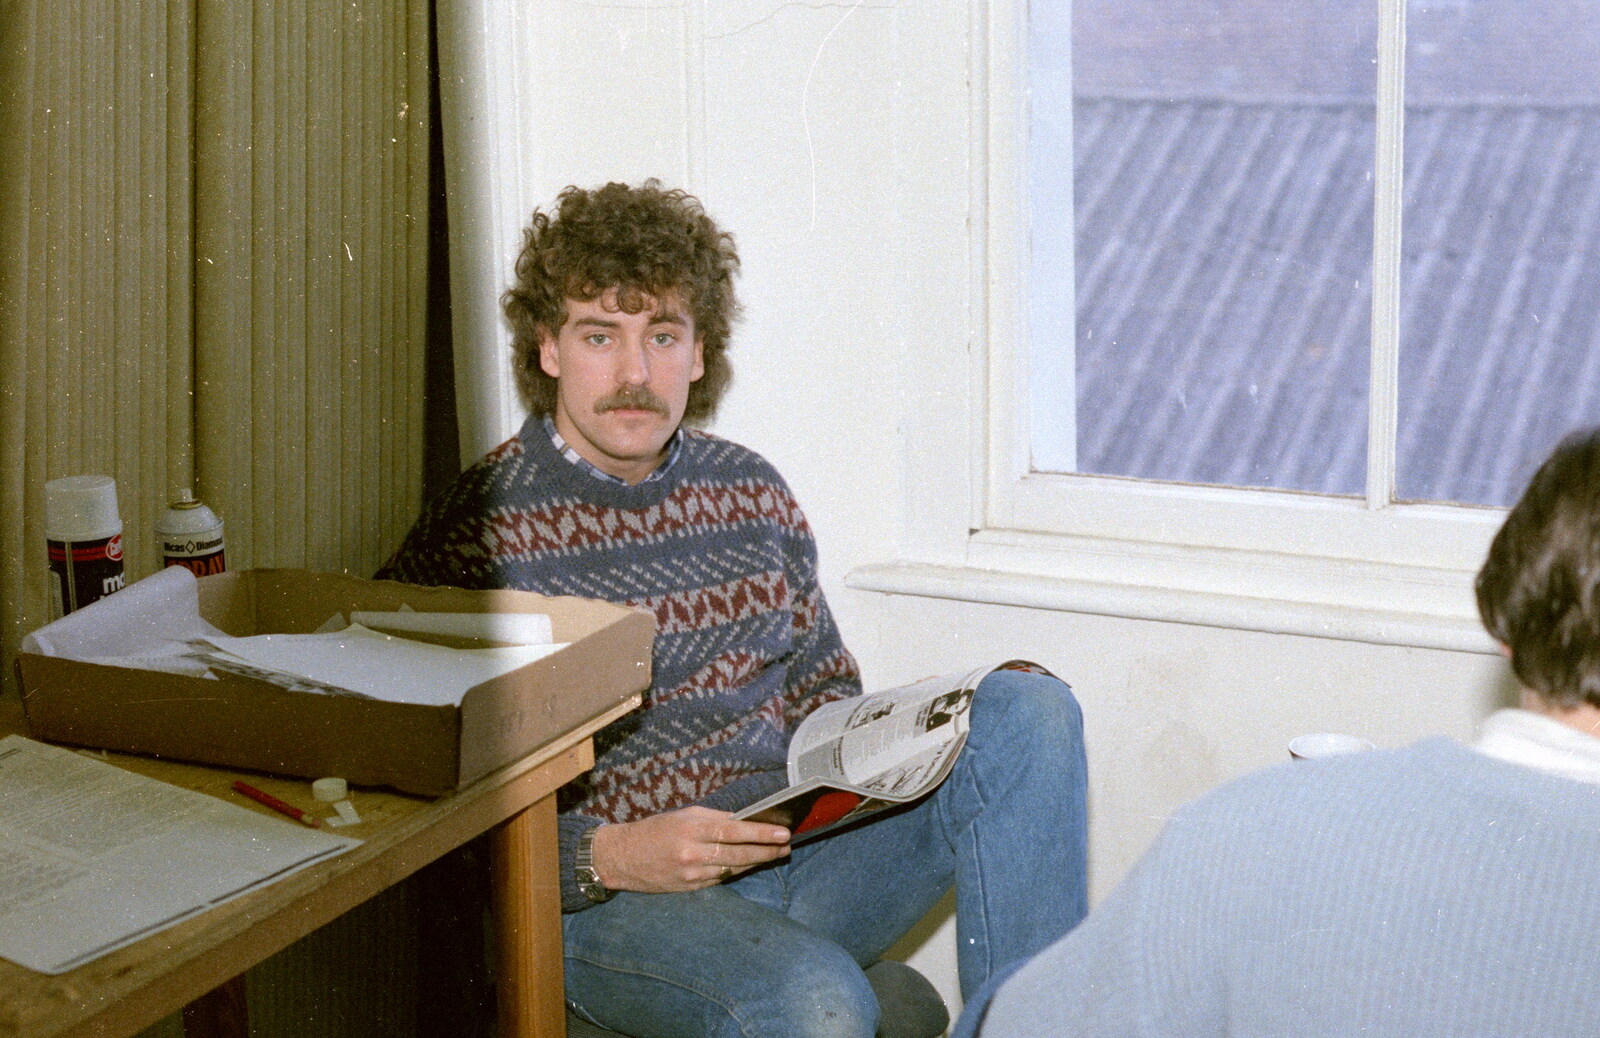 Sam Kennedy in the Fly offices from Uni: A Van Gogh Grant Cuts Protest, Plymouth, Devon - 1st March 1986